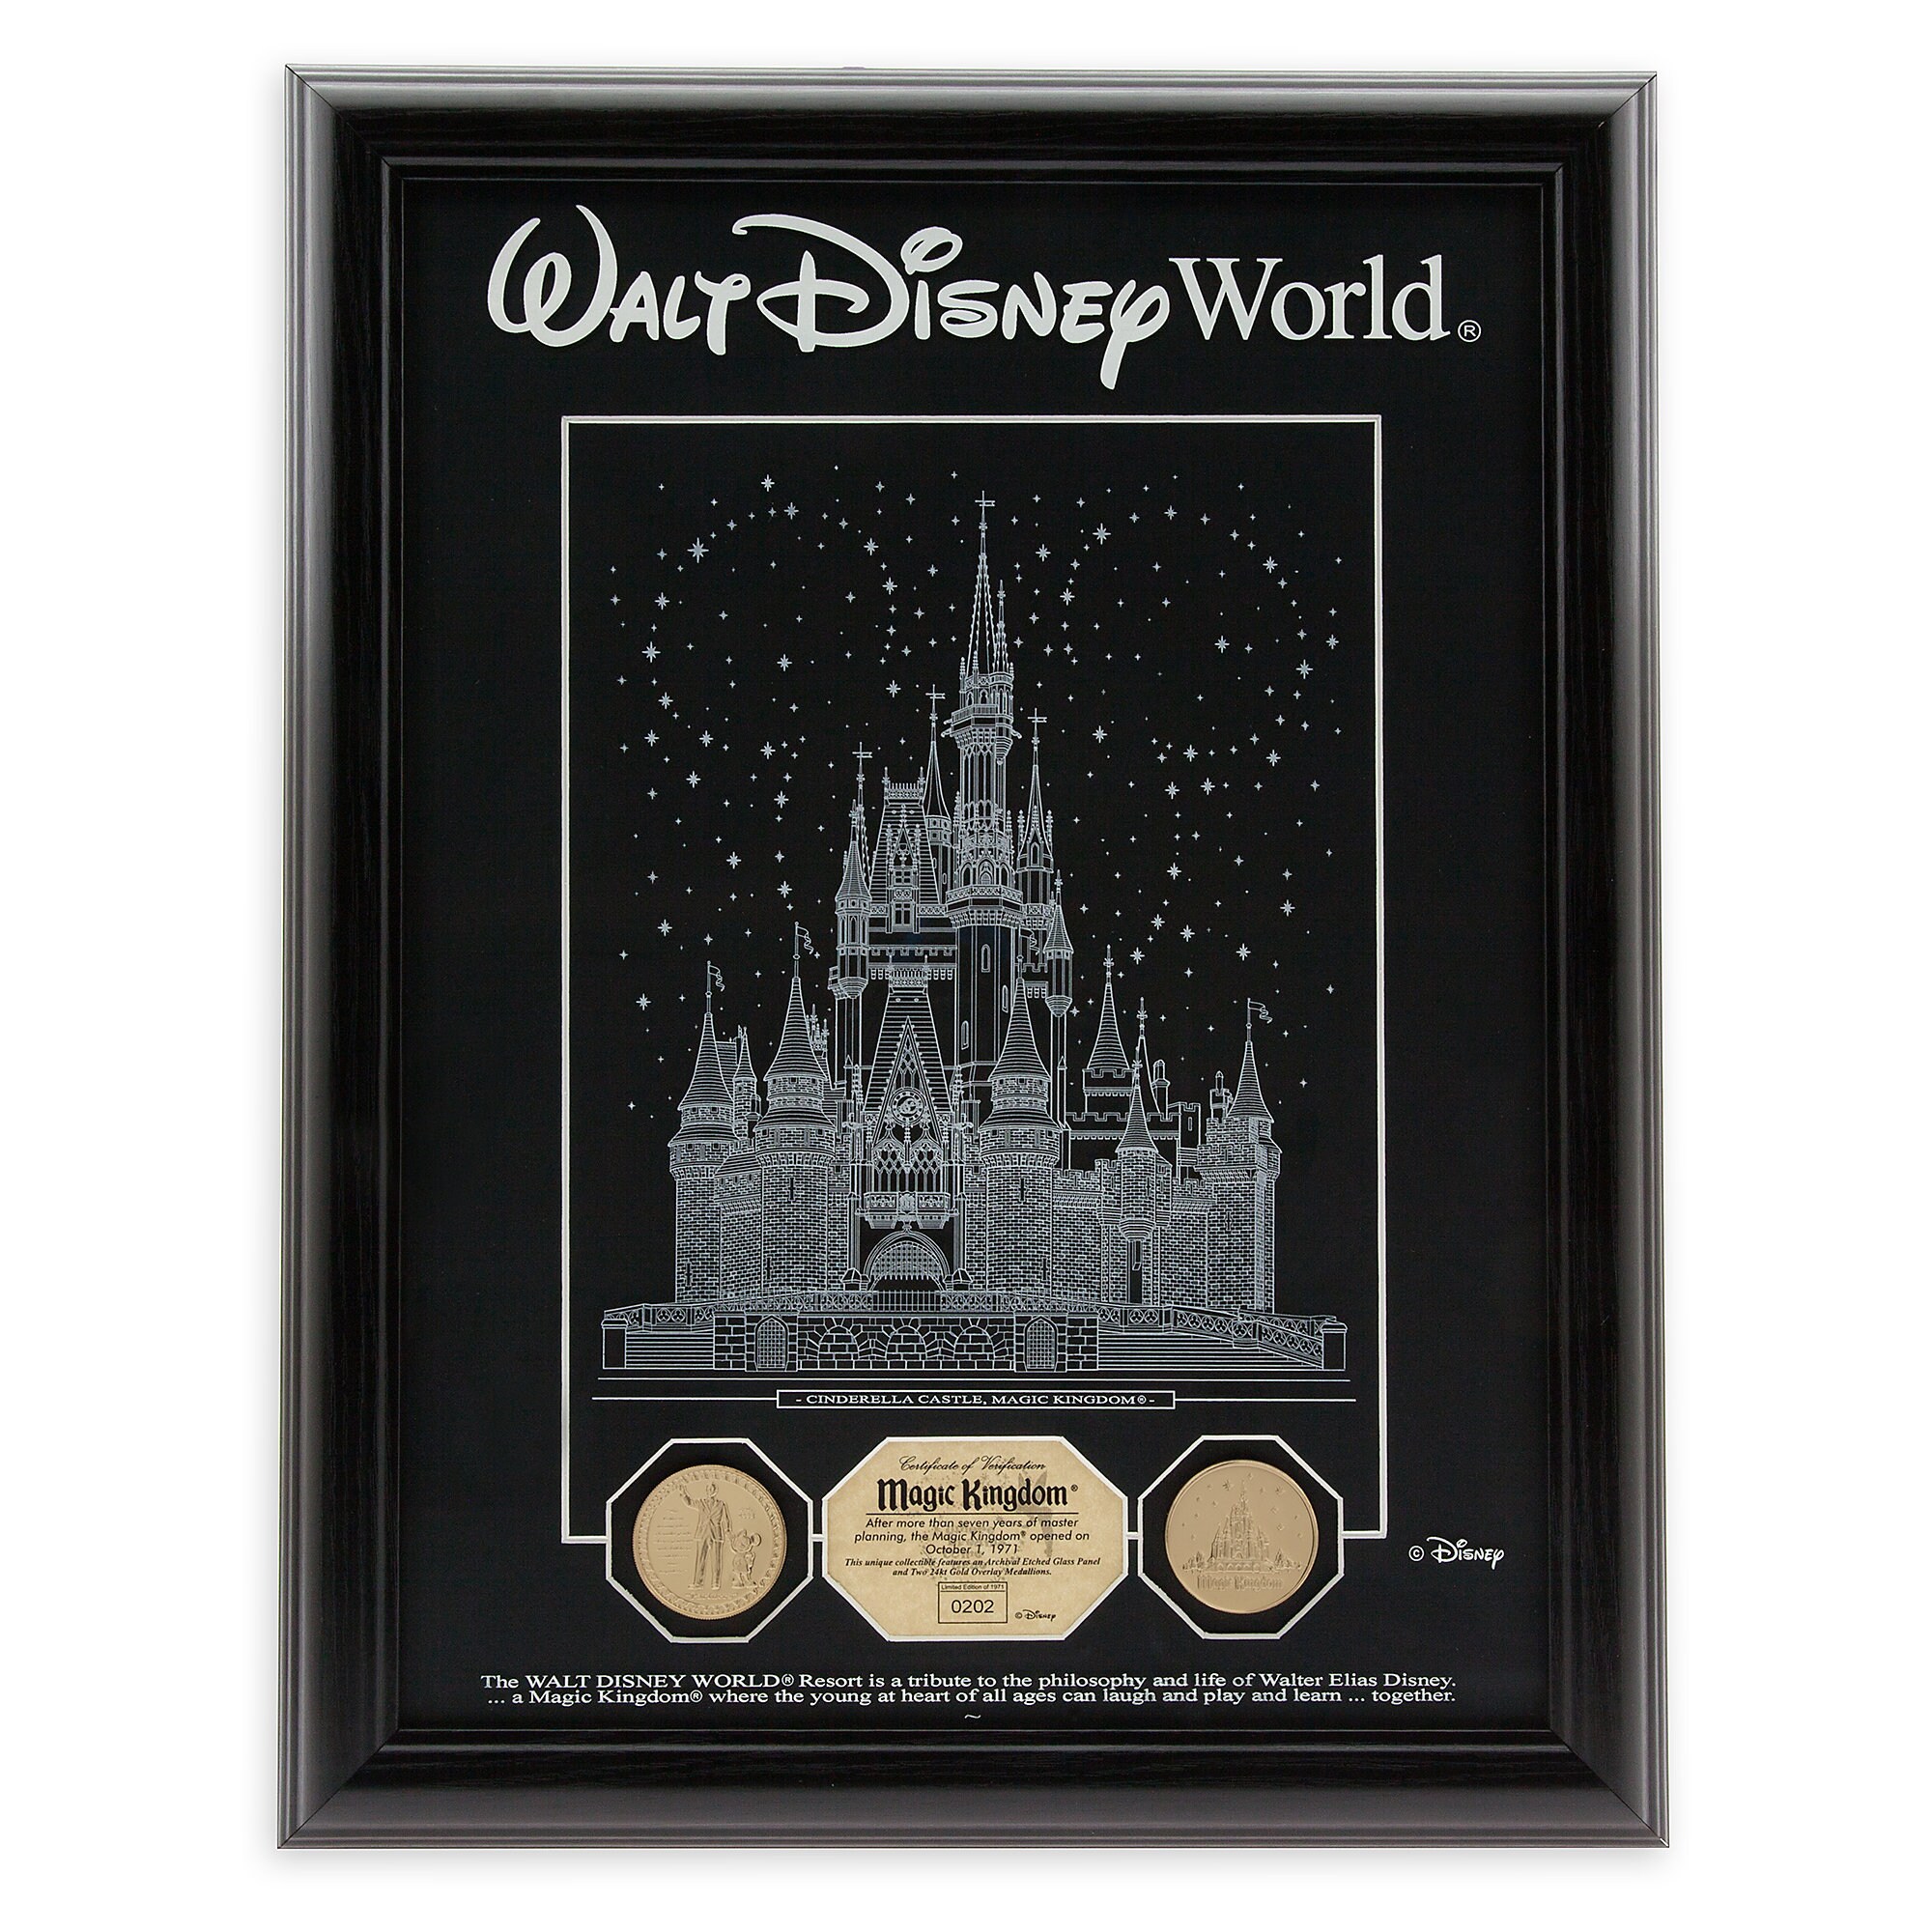 Cinderella Castle Etched Glass Panel with 24kt Gold Overlay Medallions - Walt Disney World - Limited Edition